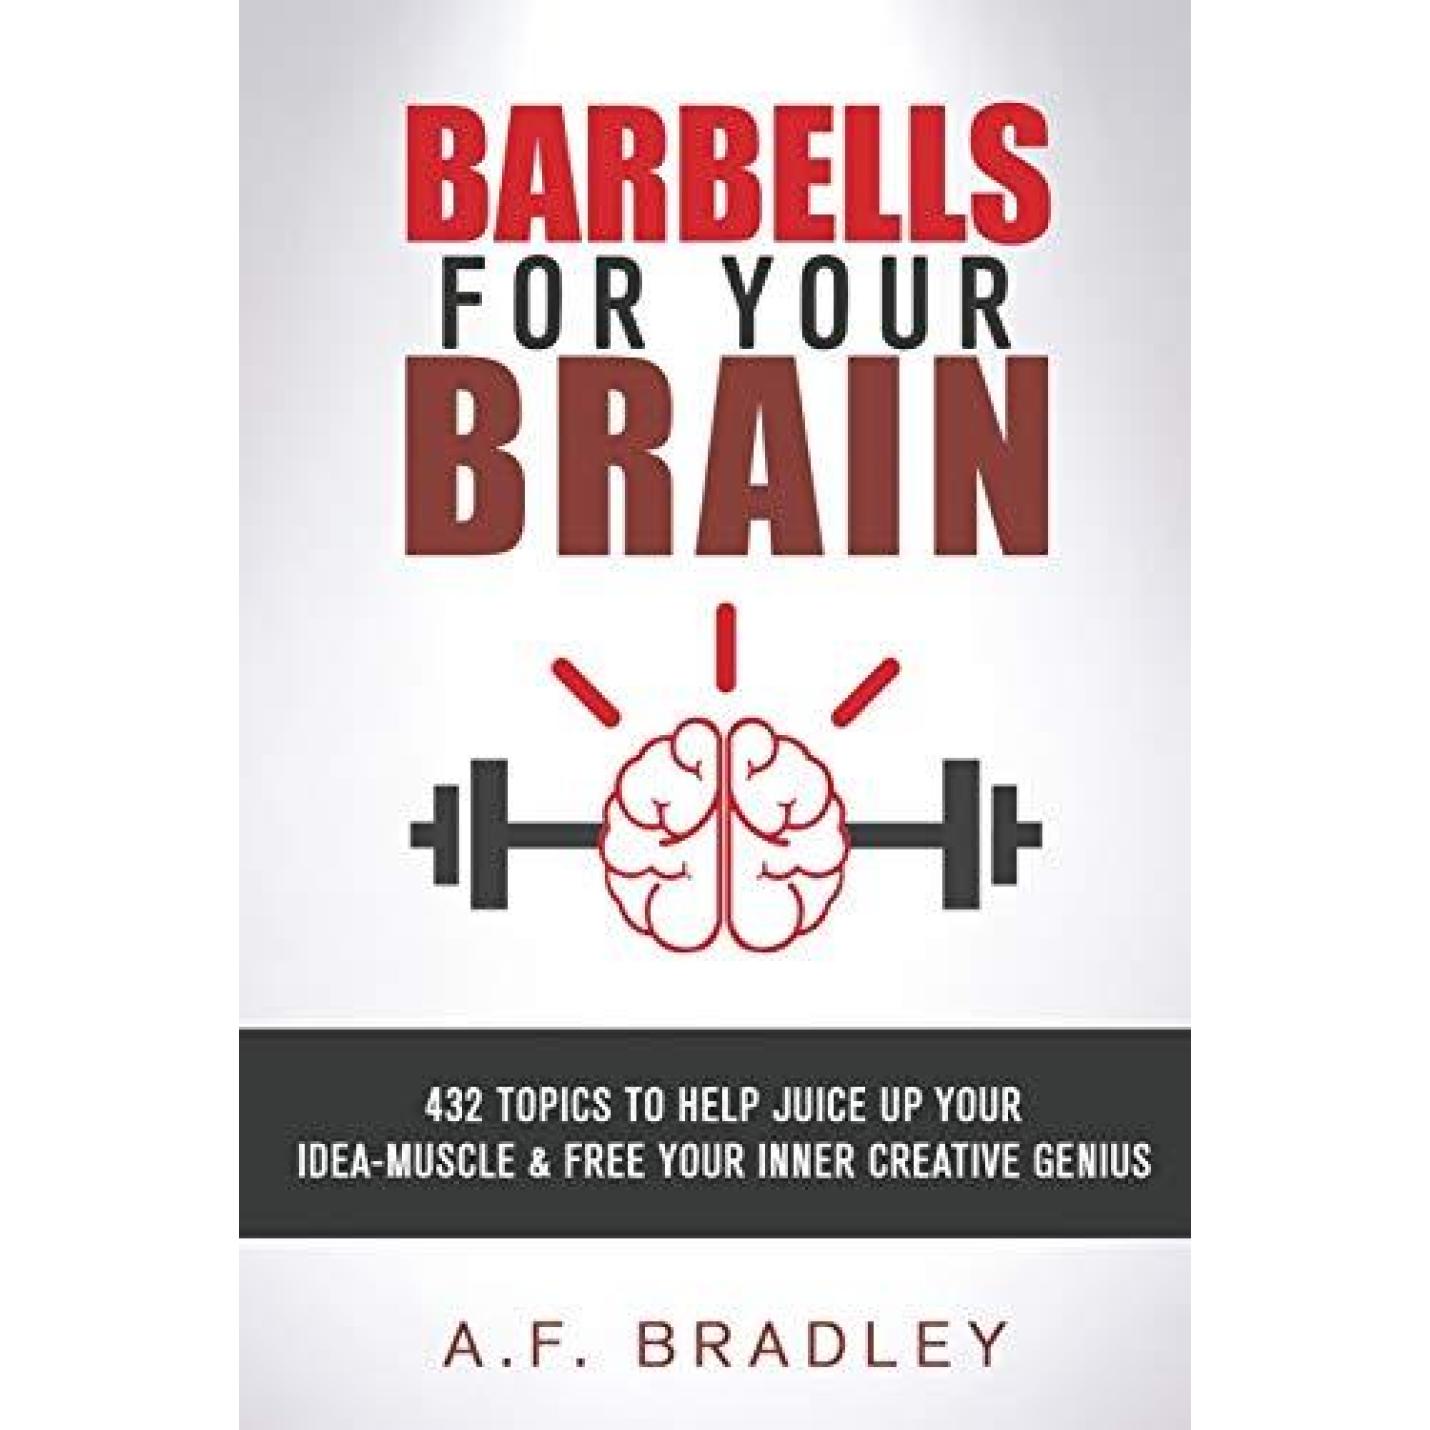 Barbells for Your Brain: 432 topics to Juice Up your Idea Muscle and Free Your Inner Creative Genius Paperback